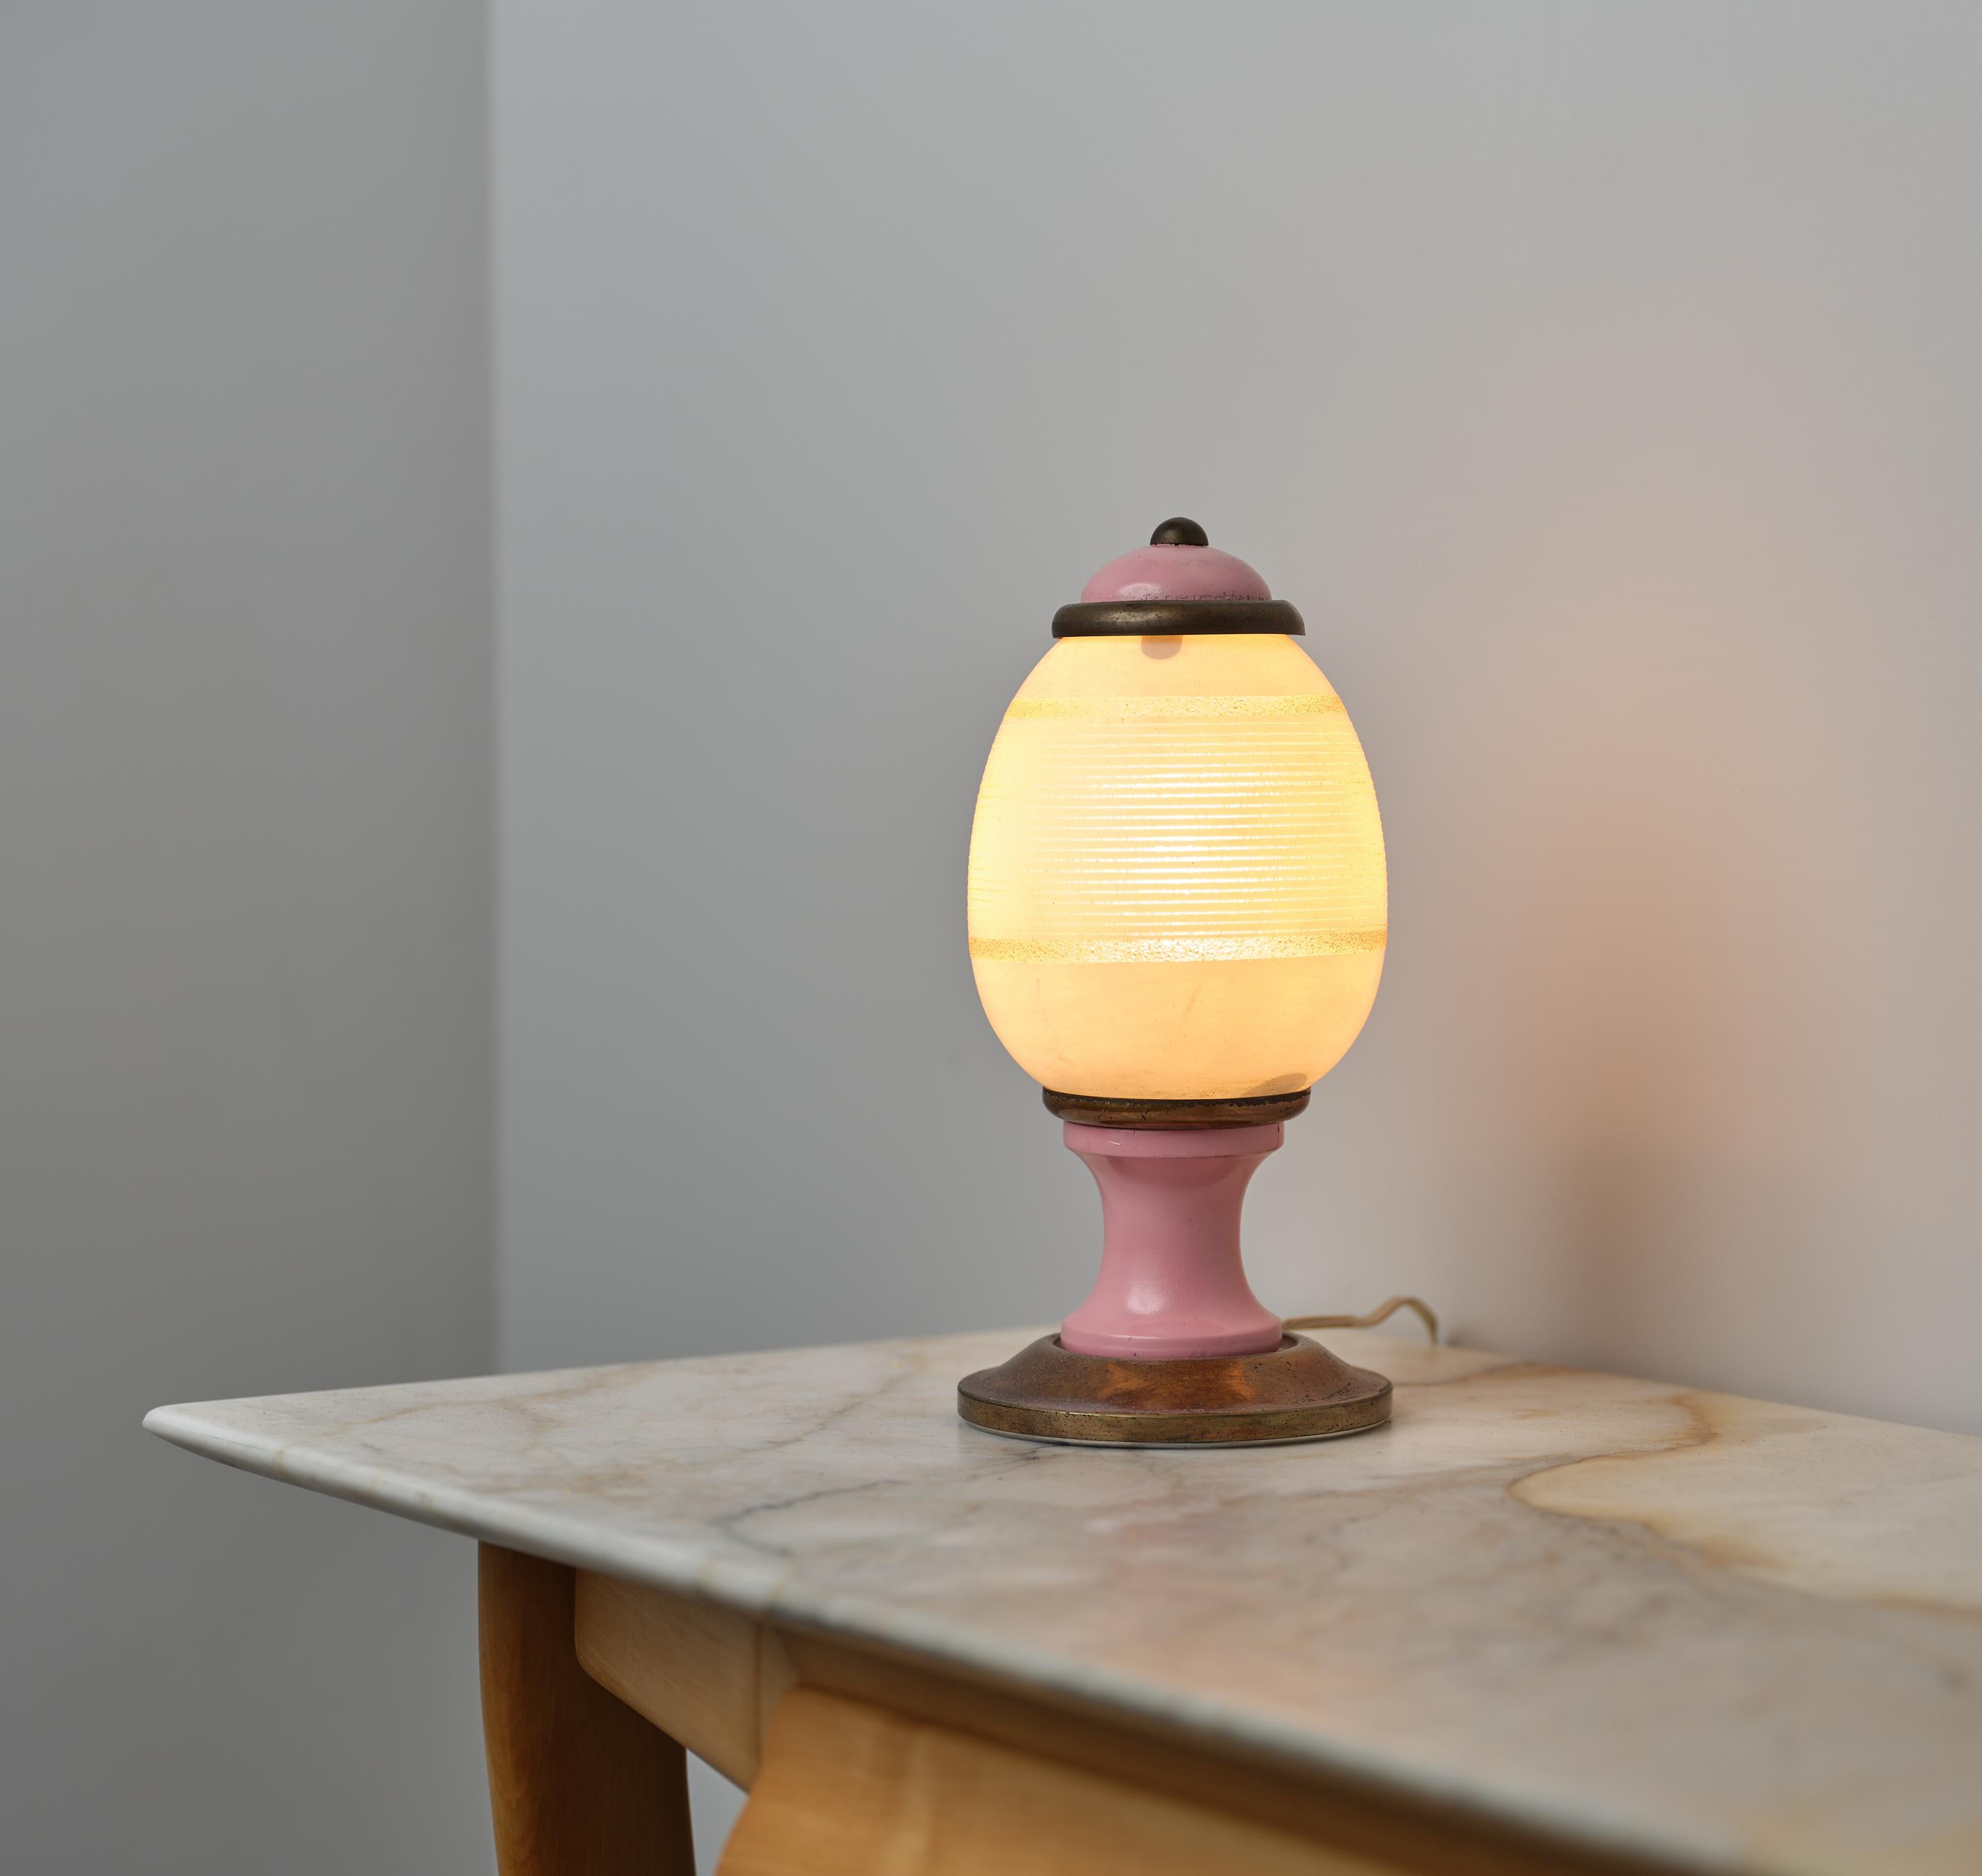 This table lamp, dating back to the 1960s, is a remarkable example of modernist design. Originating from Italy, the piece showcases the era's aesthetic with clean lines and a functional form. The lamp features a dual-material construction: the base